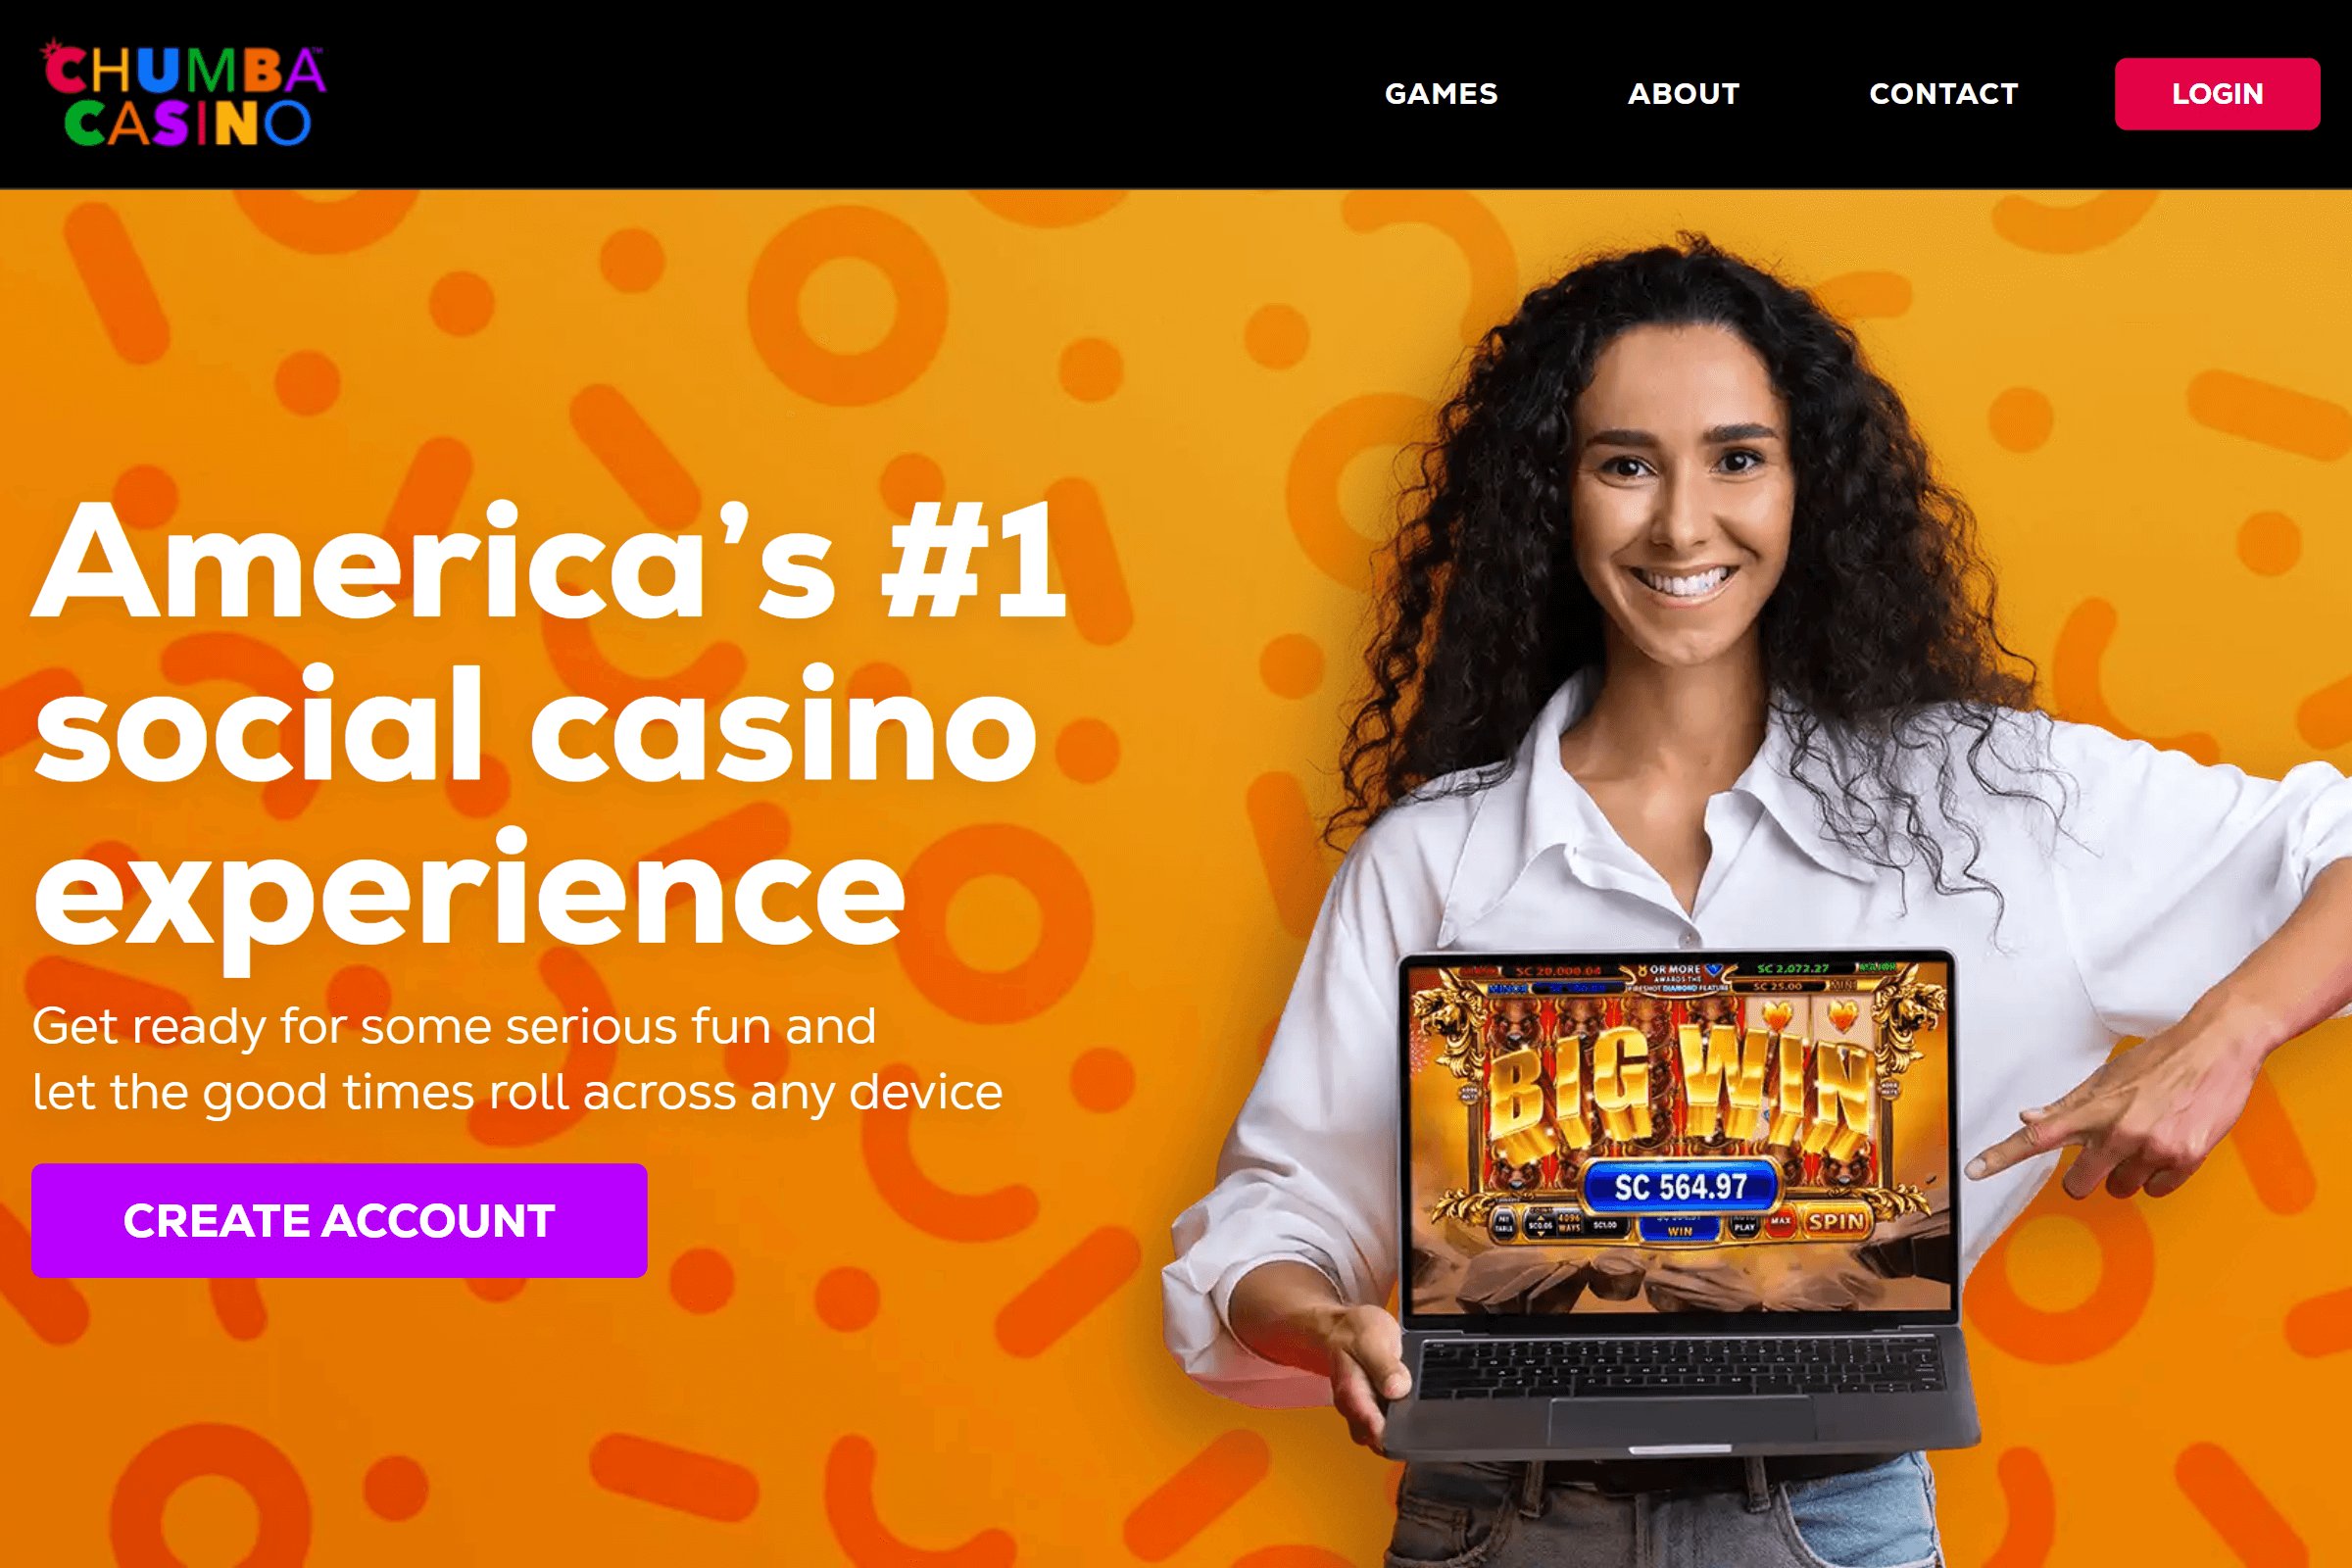 Chumba Casino on ReadSomeReviews